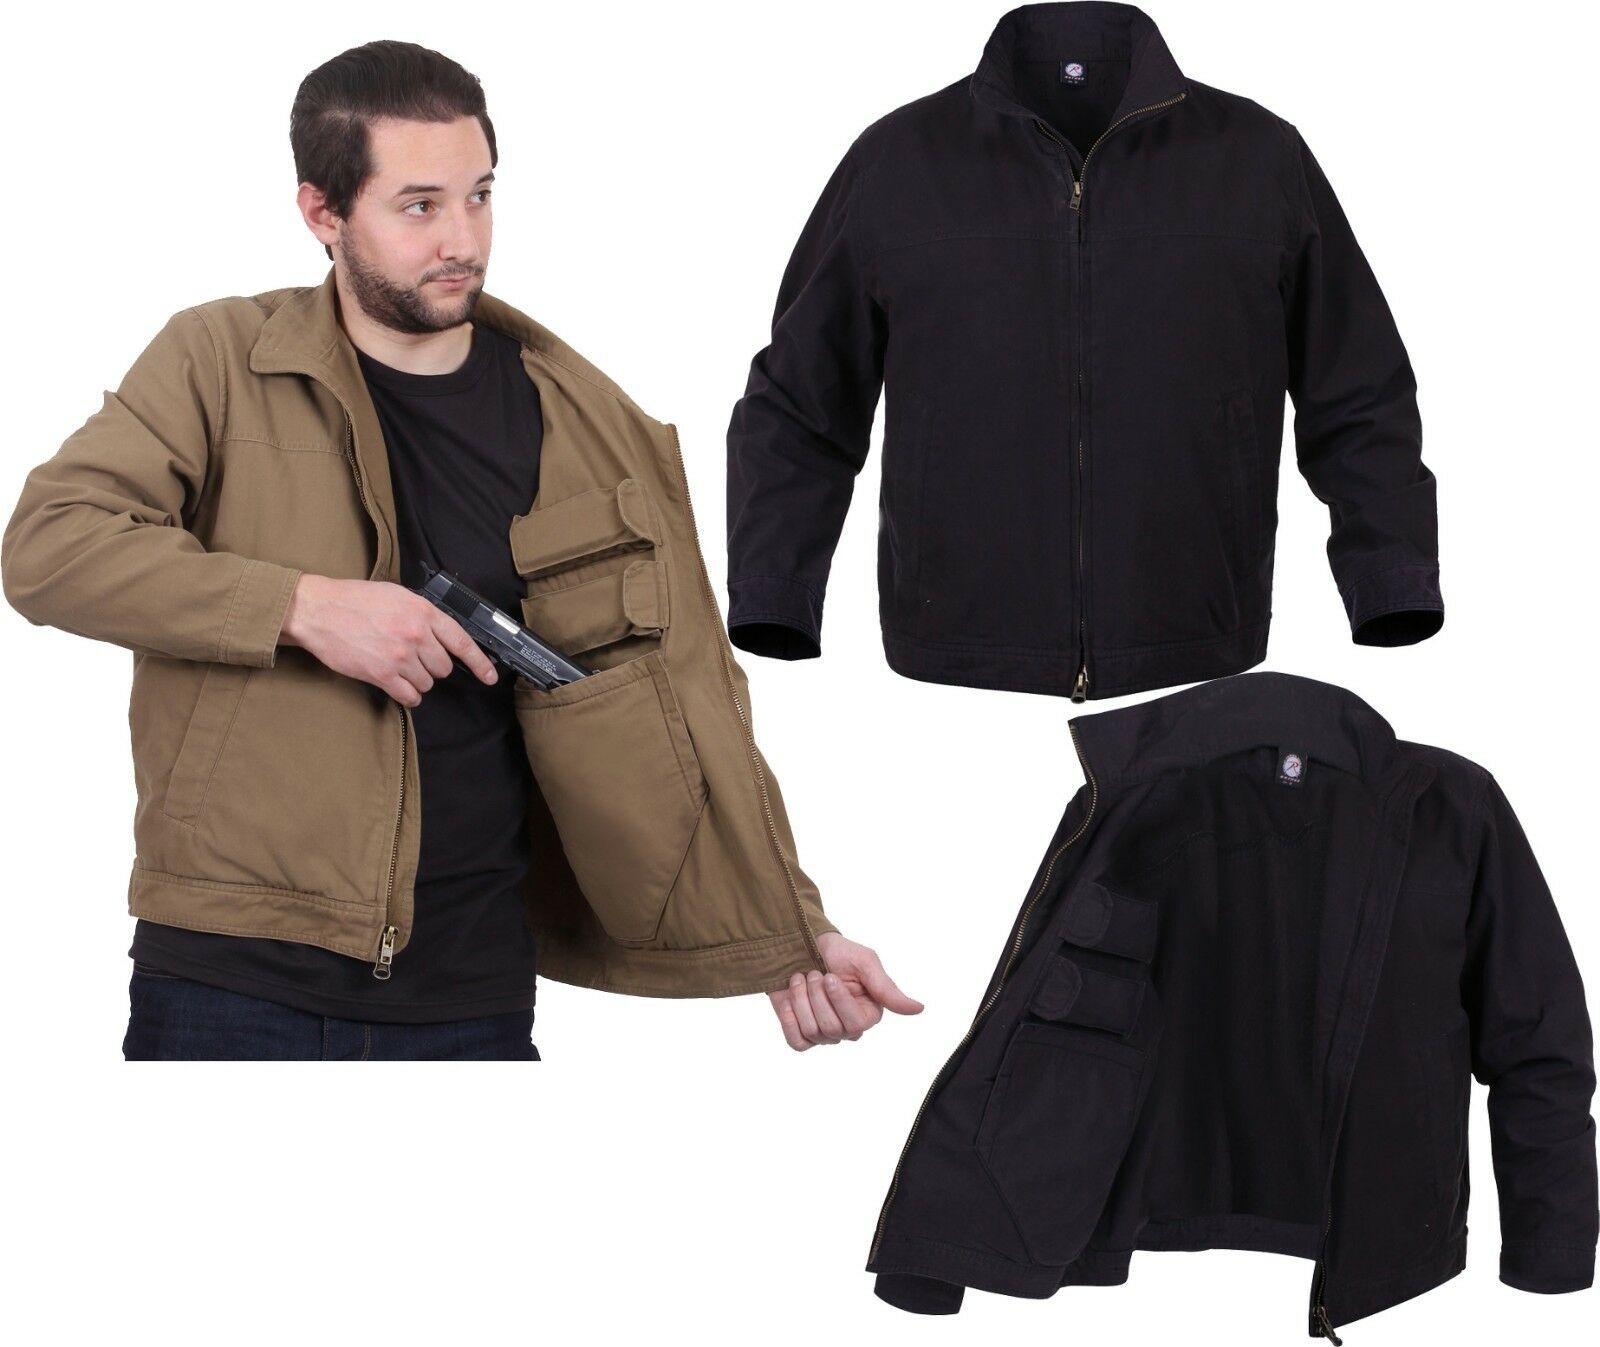 Tactical Concealed Carry Lightweight Jacket Ambidextrous Ccw Solid Coat Coats And Jackets 